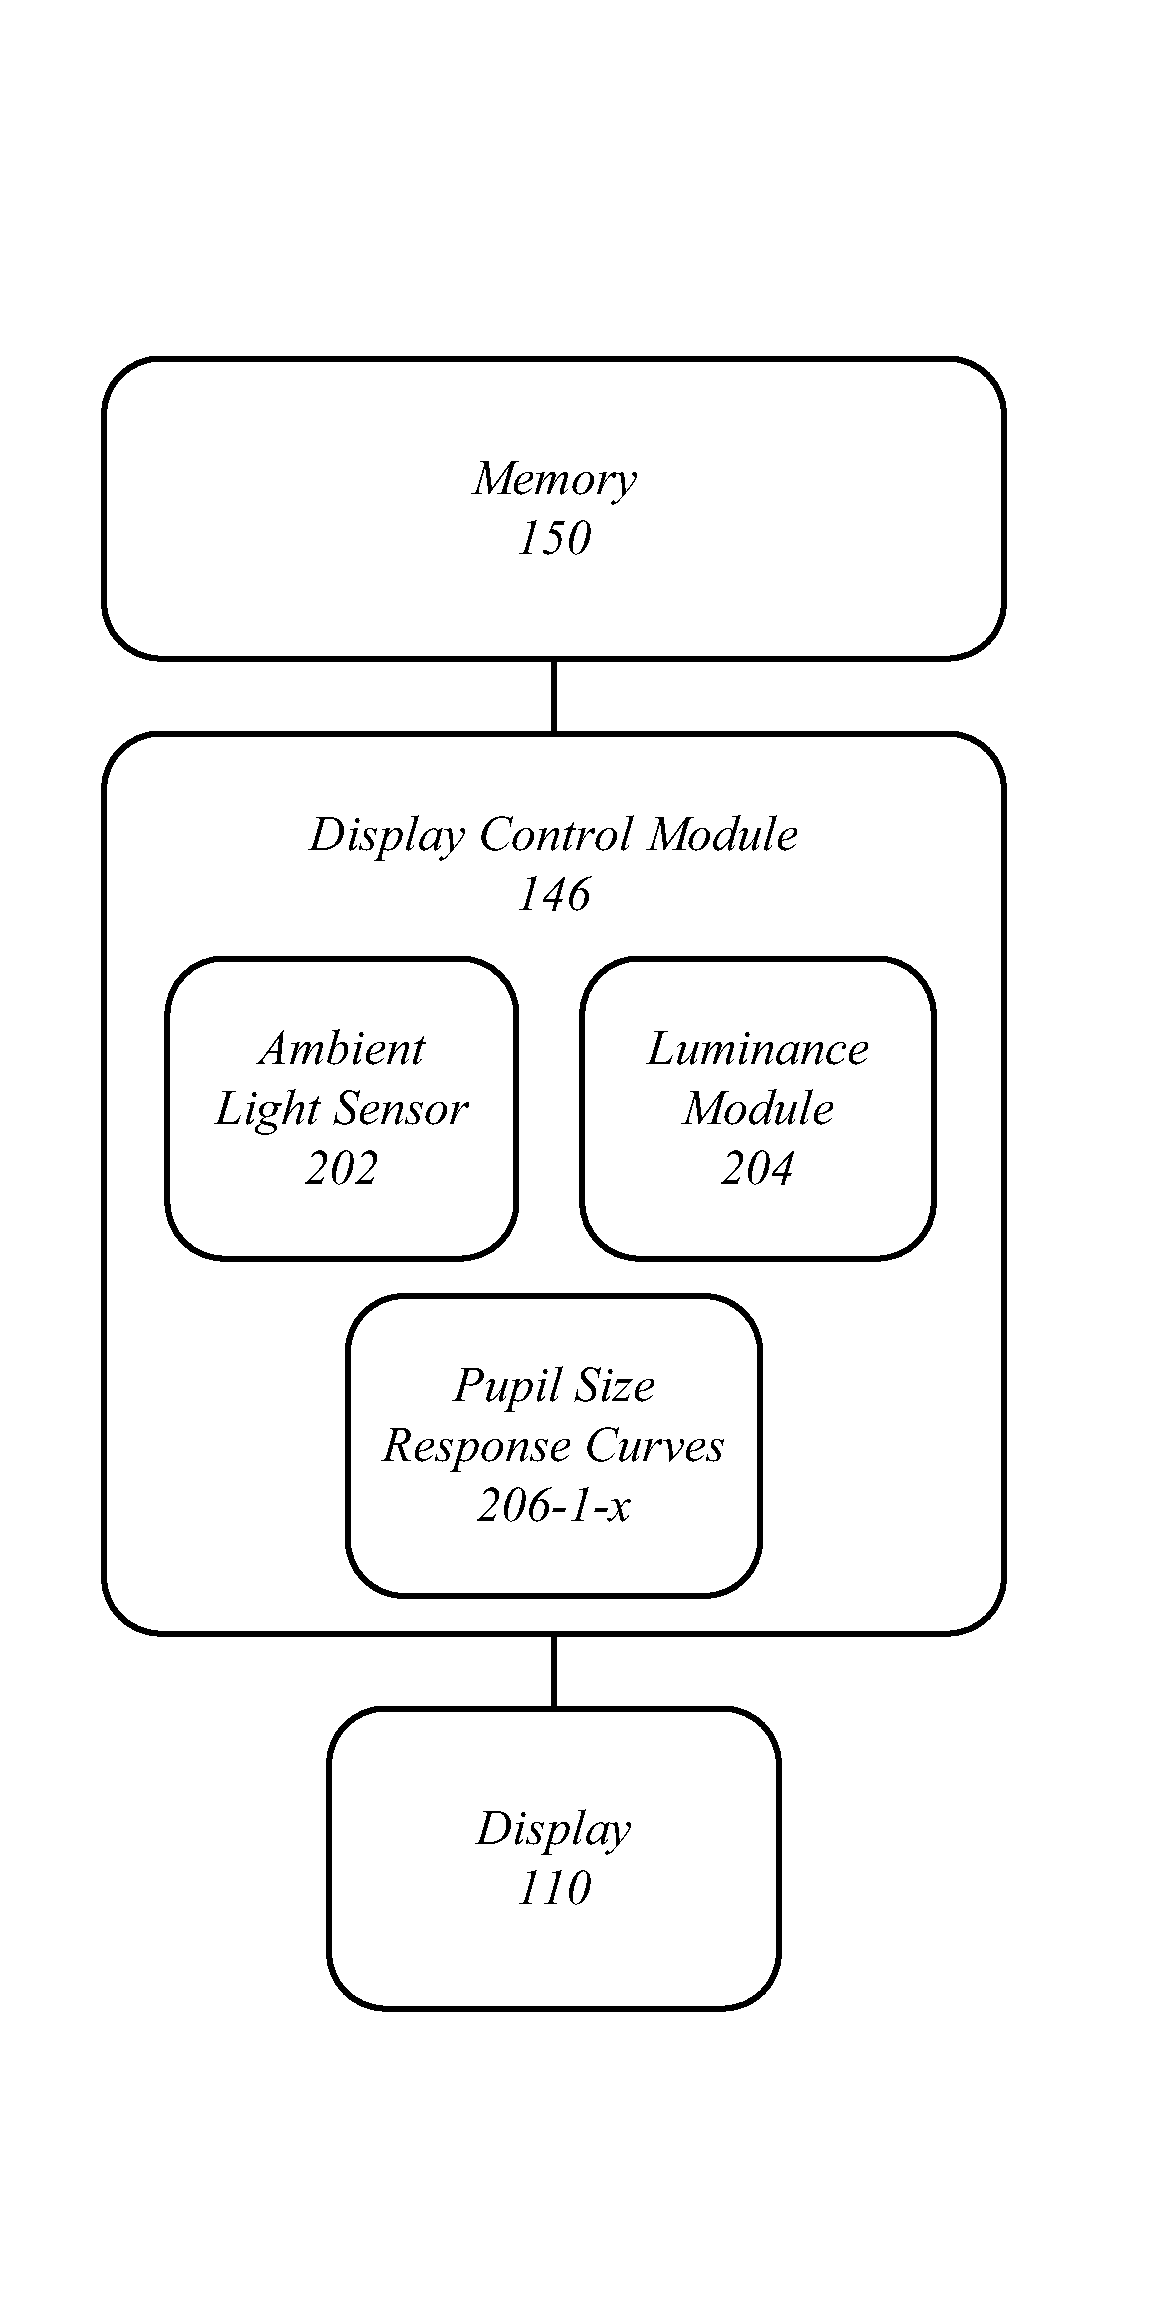 Techniques for adaptive brightness control of a display